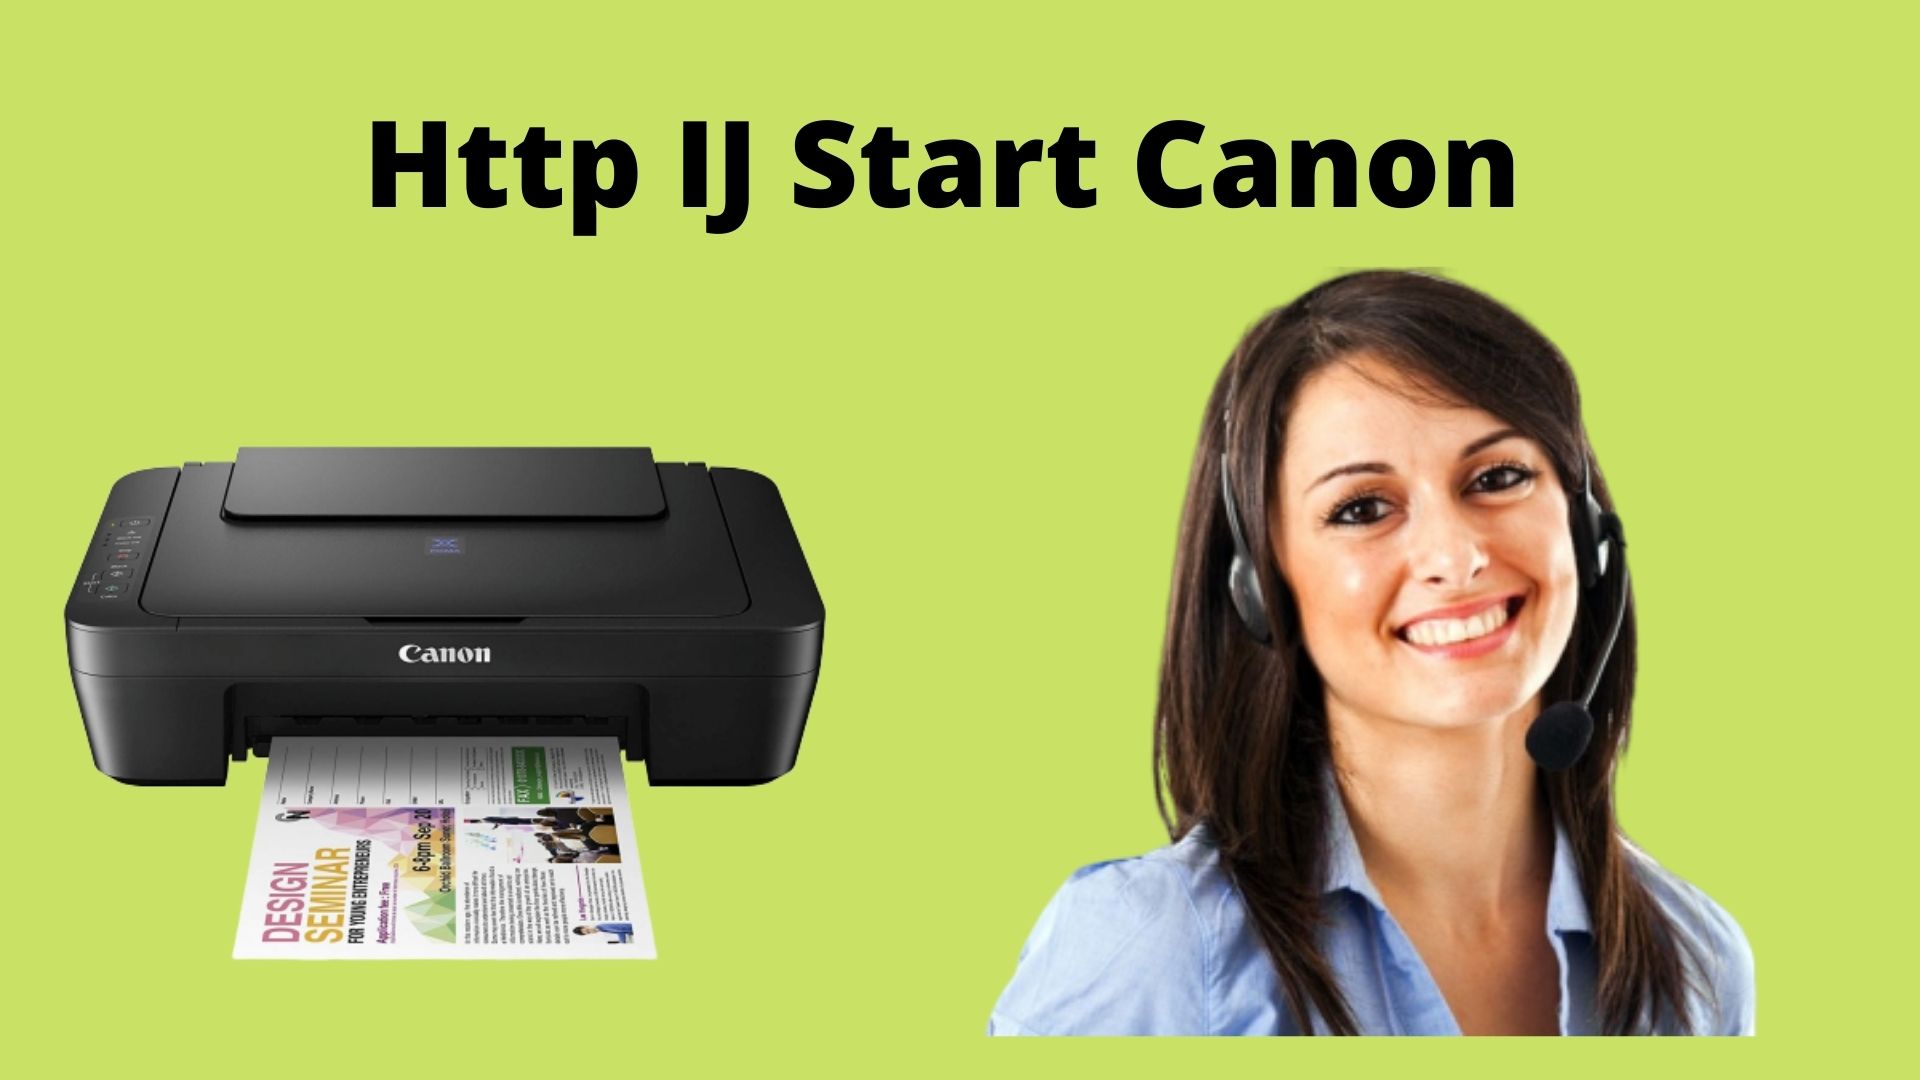 Learn how to connect the Canon MG3022 printer to the wireless system